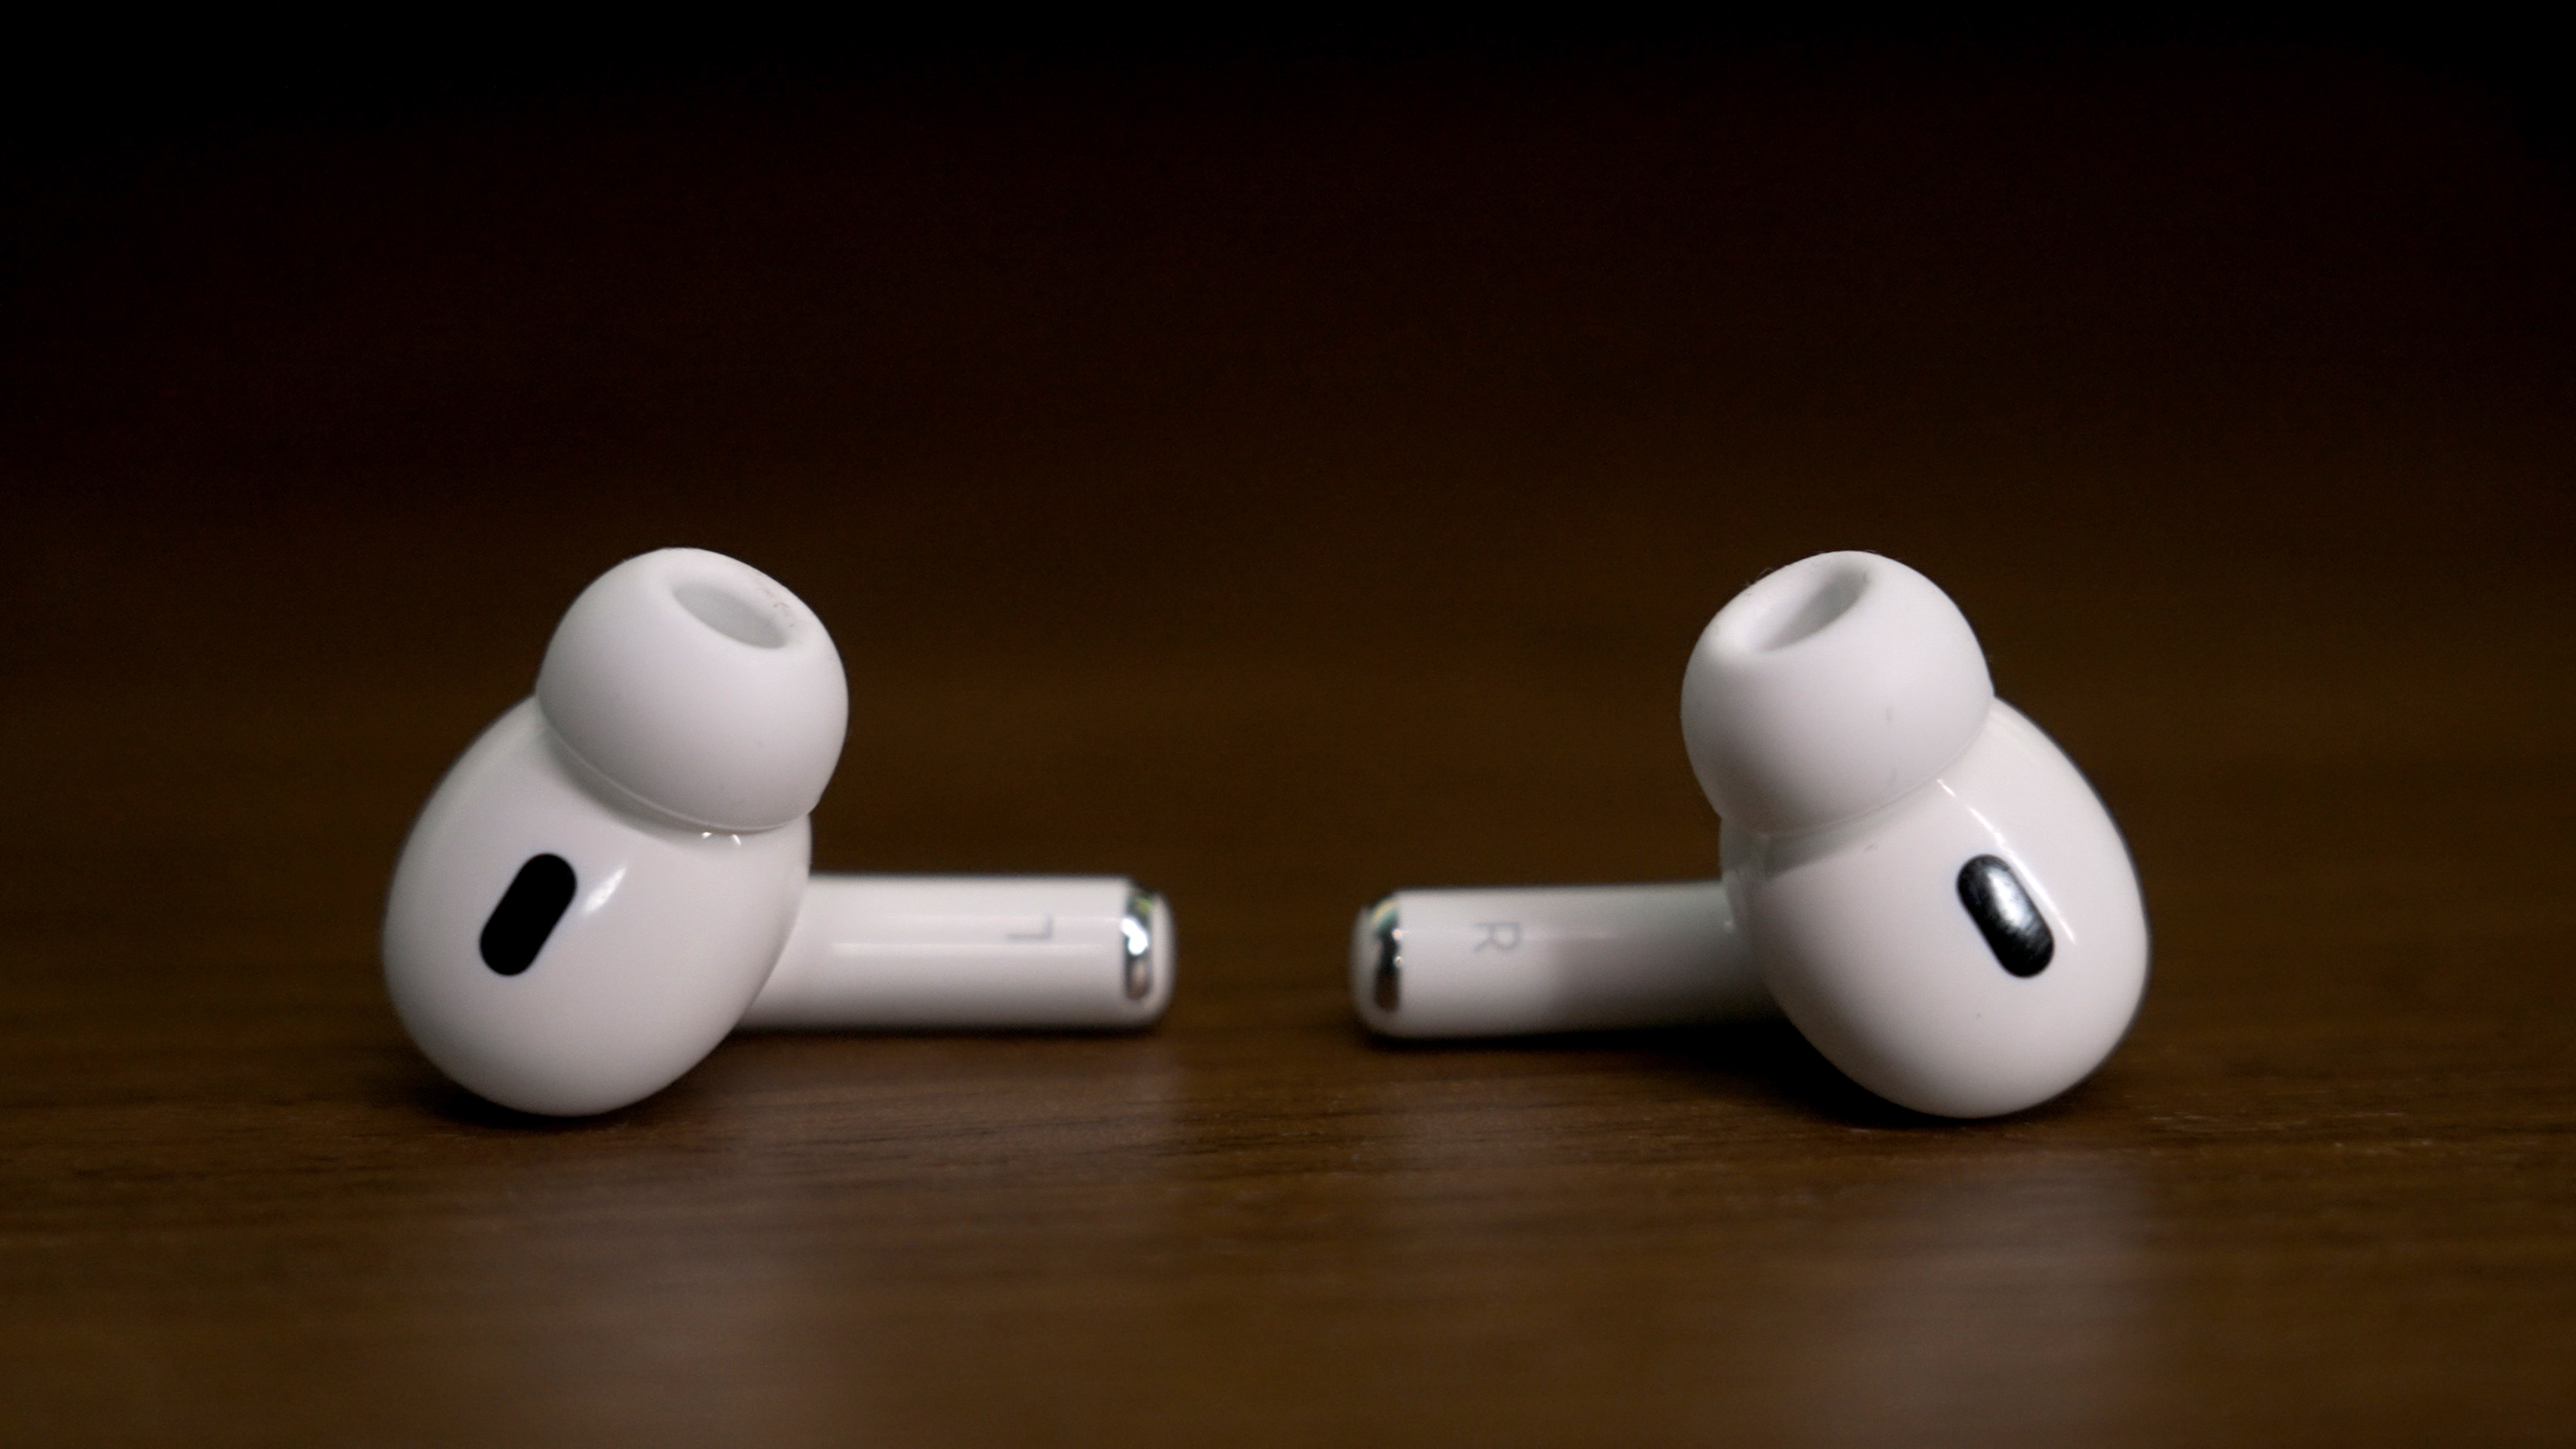 Apple AirPods Pro 2nd Gen USB-C Review: New Port and Adaptive Audio